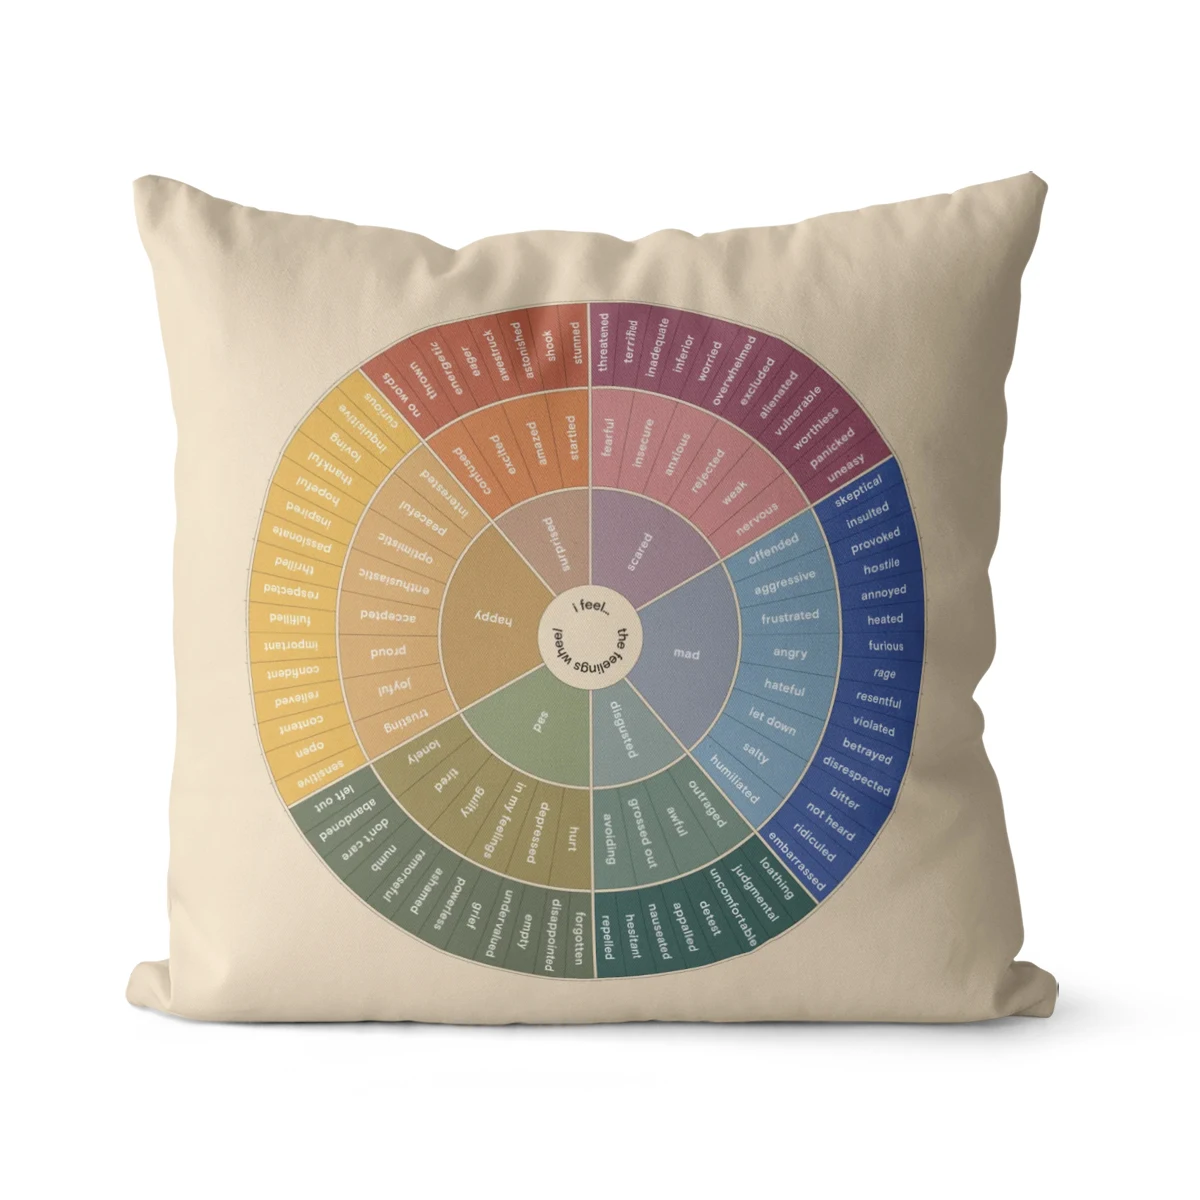 

WUZIDREAM Wheel Of Feelings Emotions Pillowcase Counselor Physical Therapist Gifts Cushion Cover Home Decorative Polyester